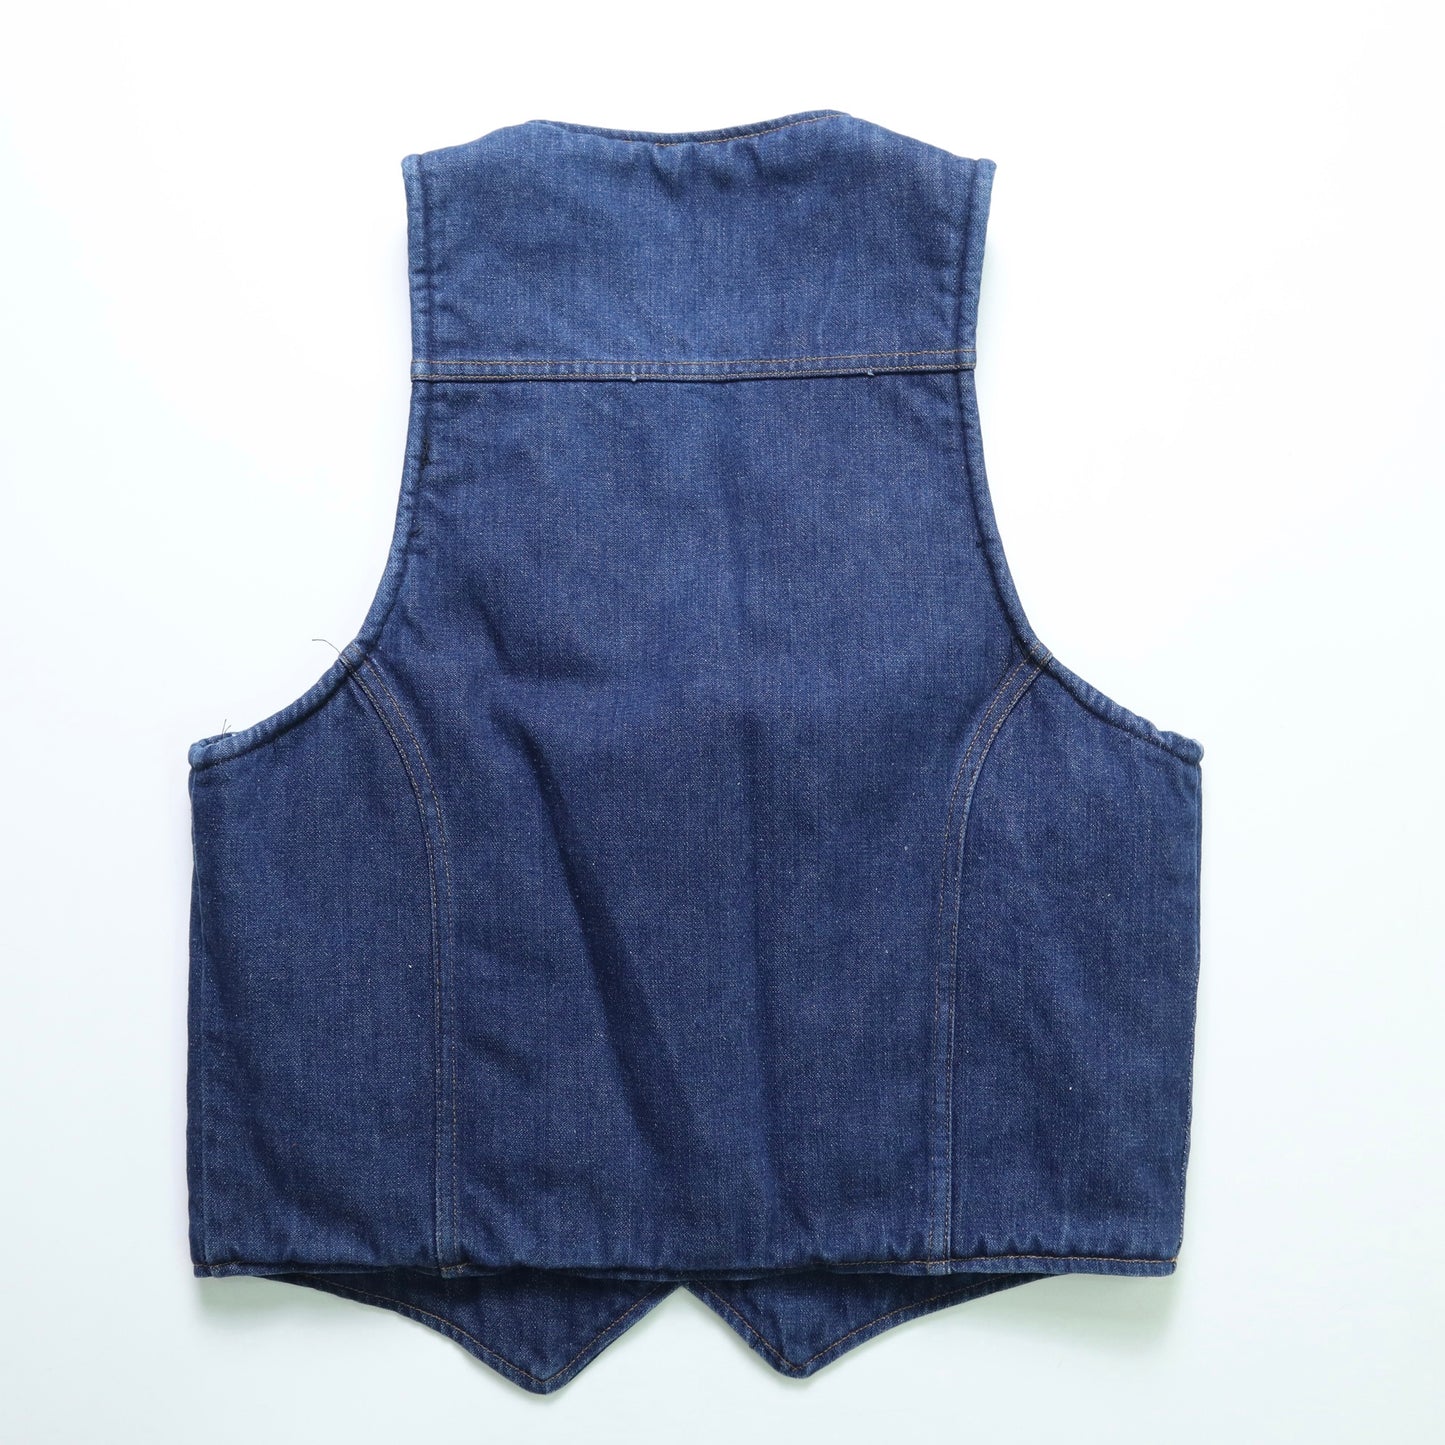 Made in the USA 70's Dickies Vaquero Sherpa Lined Vest Lamb Denim Vest